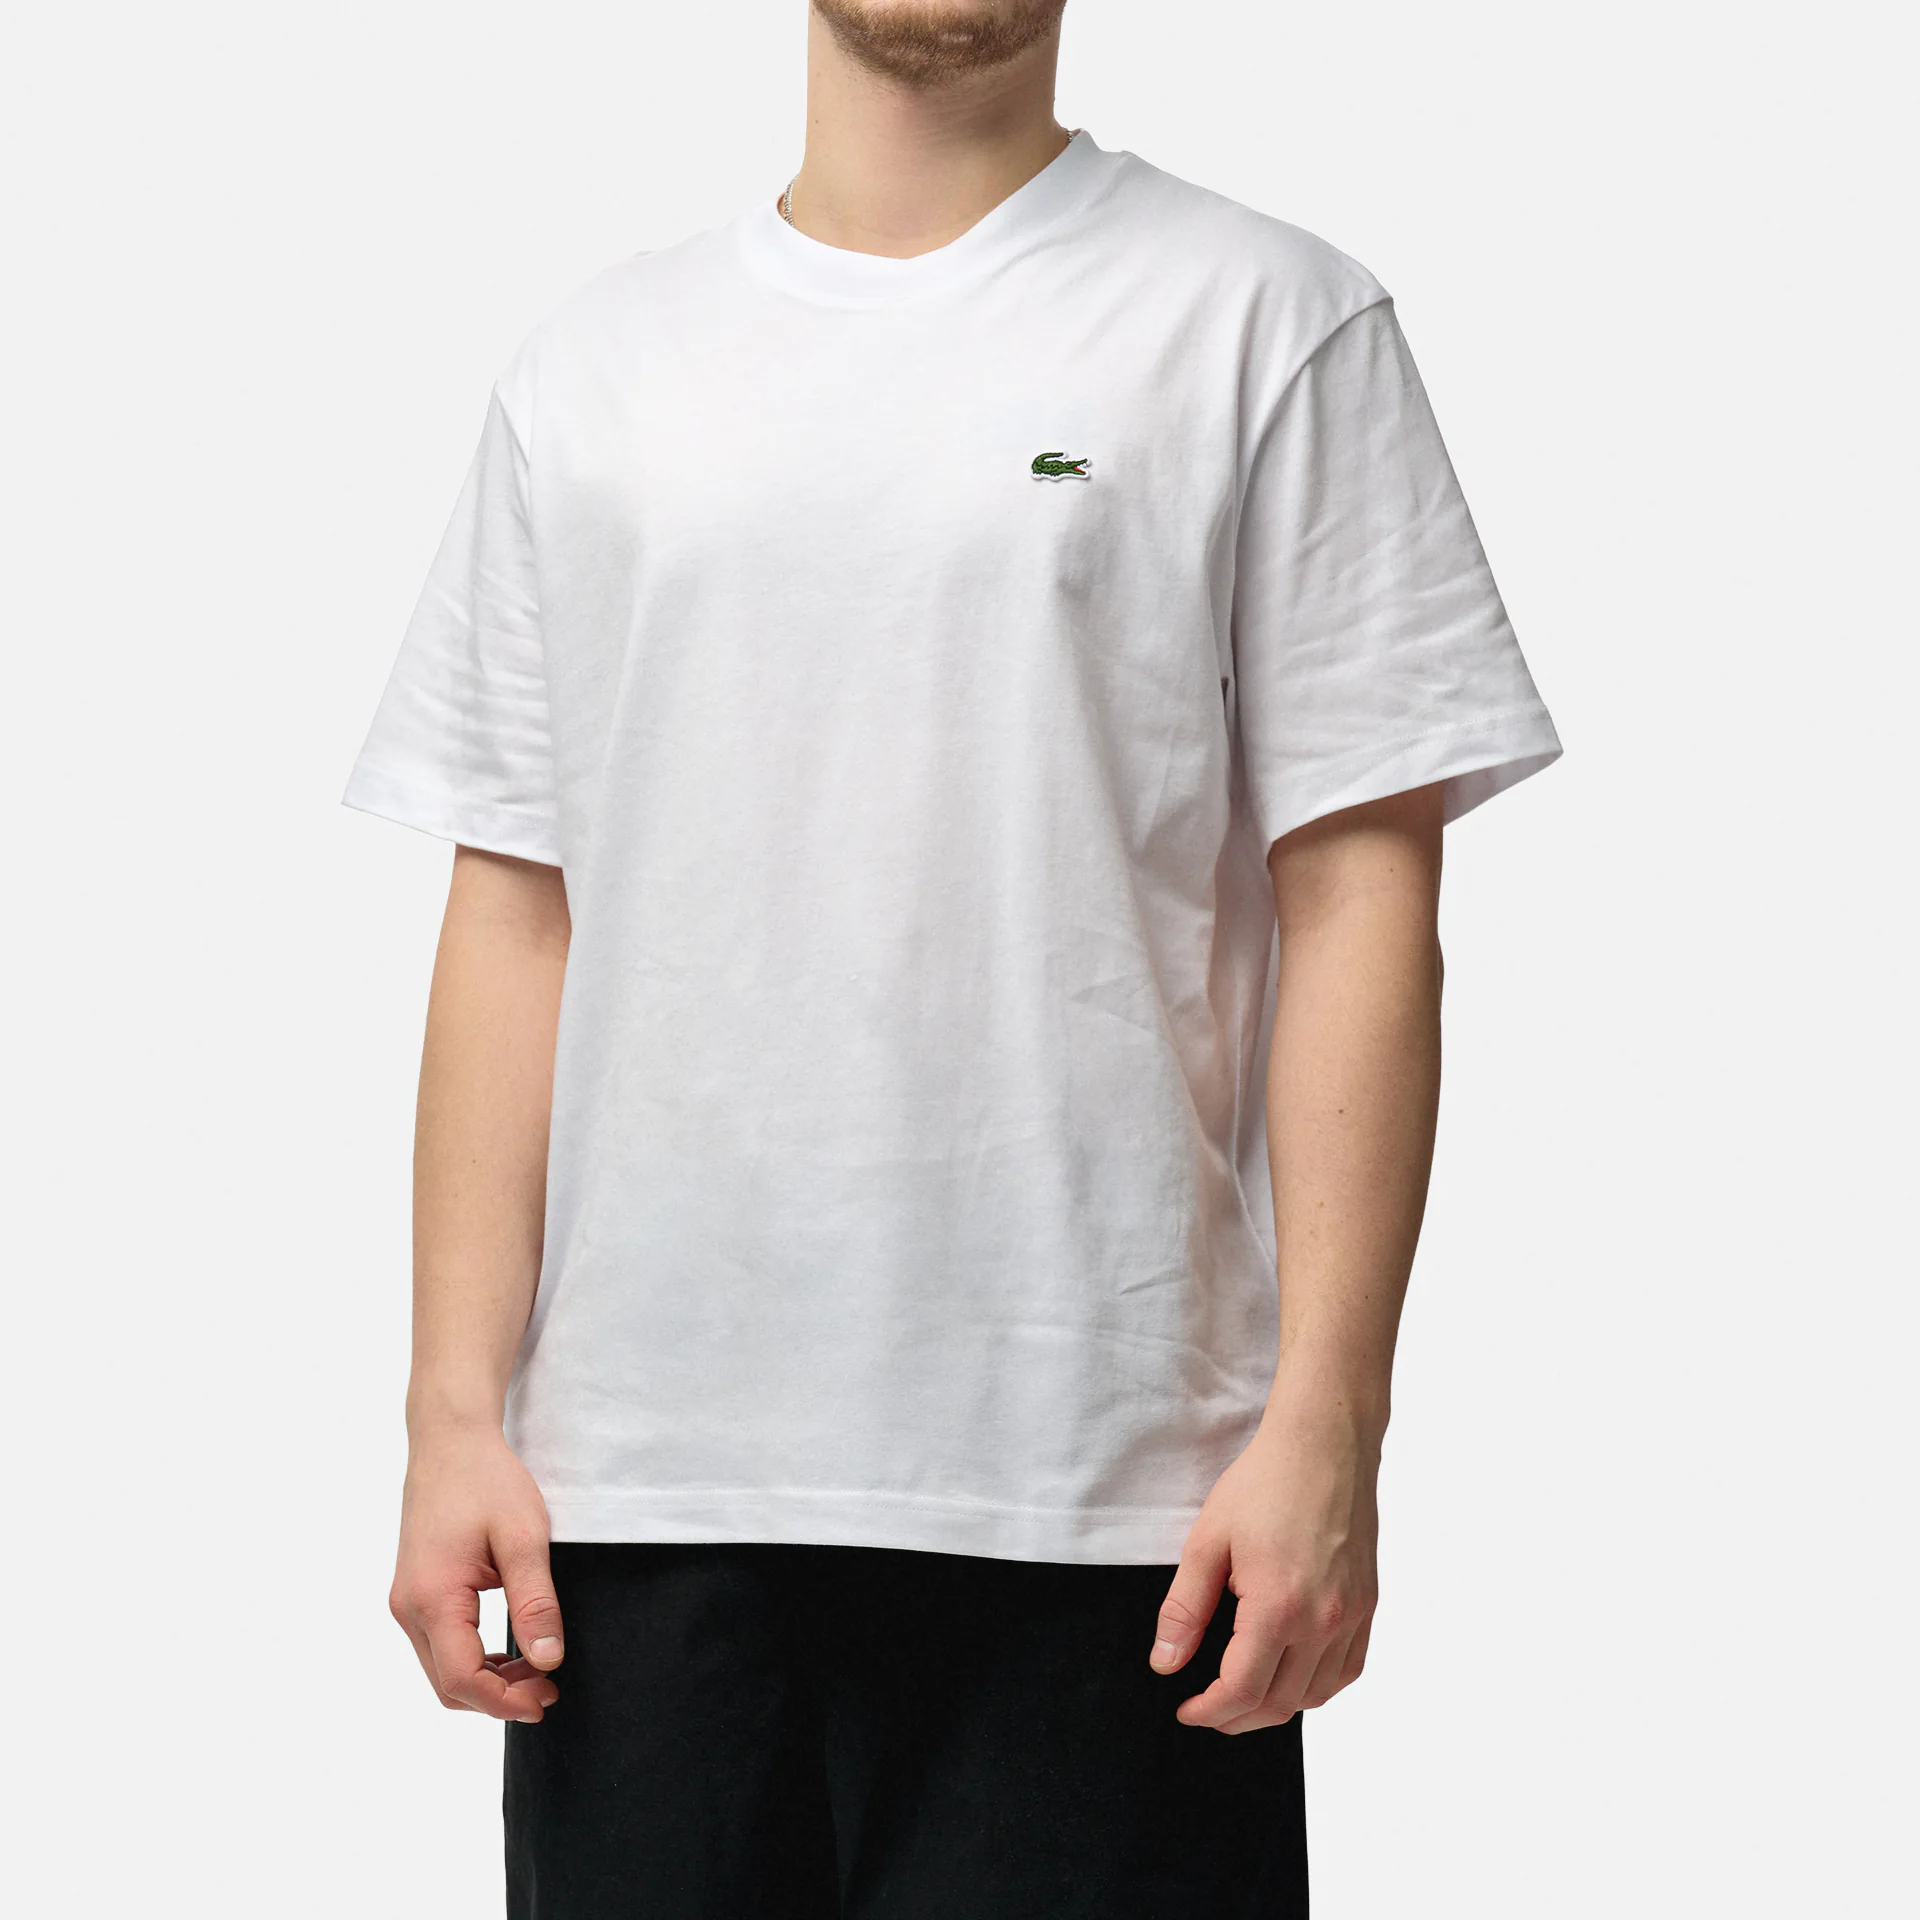  Lacoste Jersey T-Shirt White